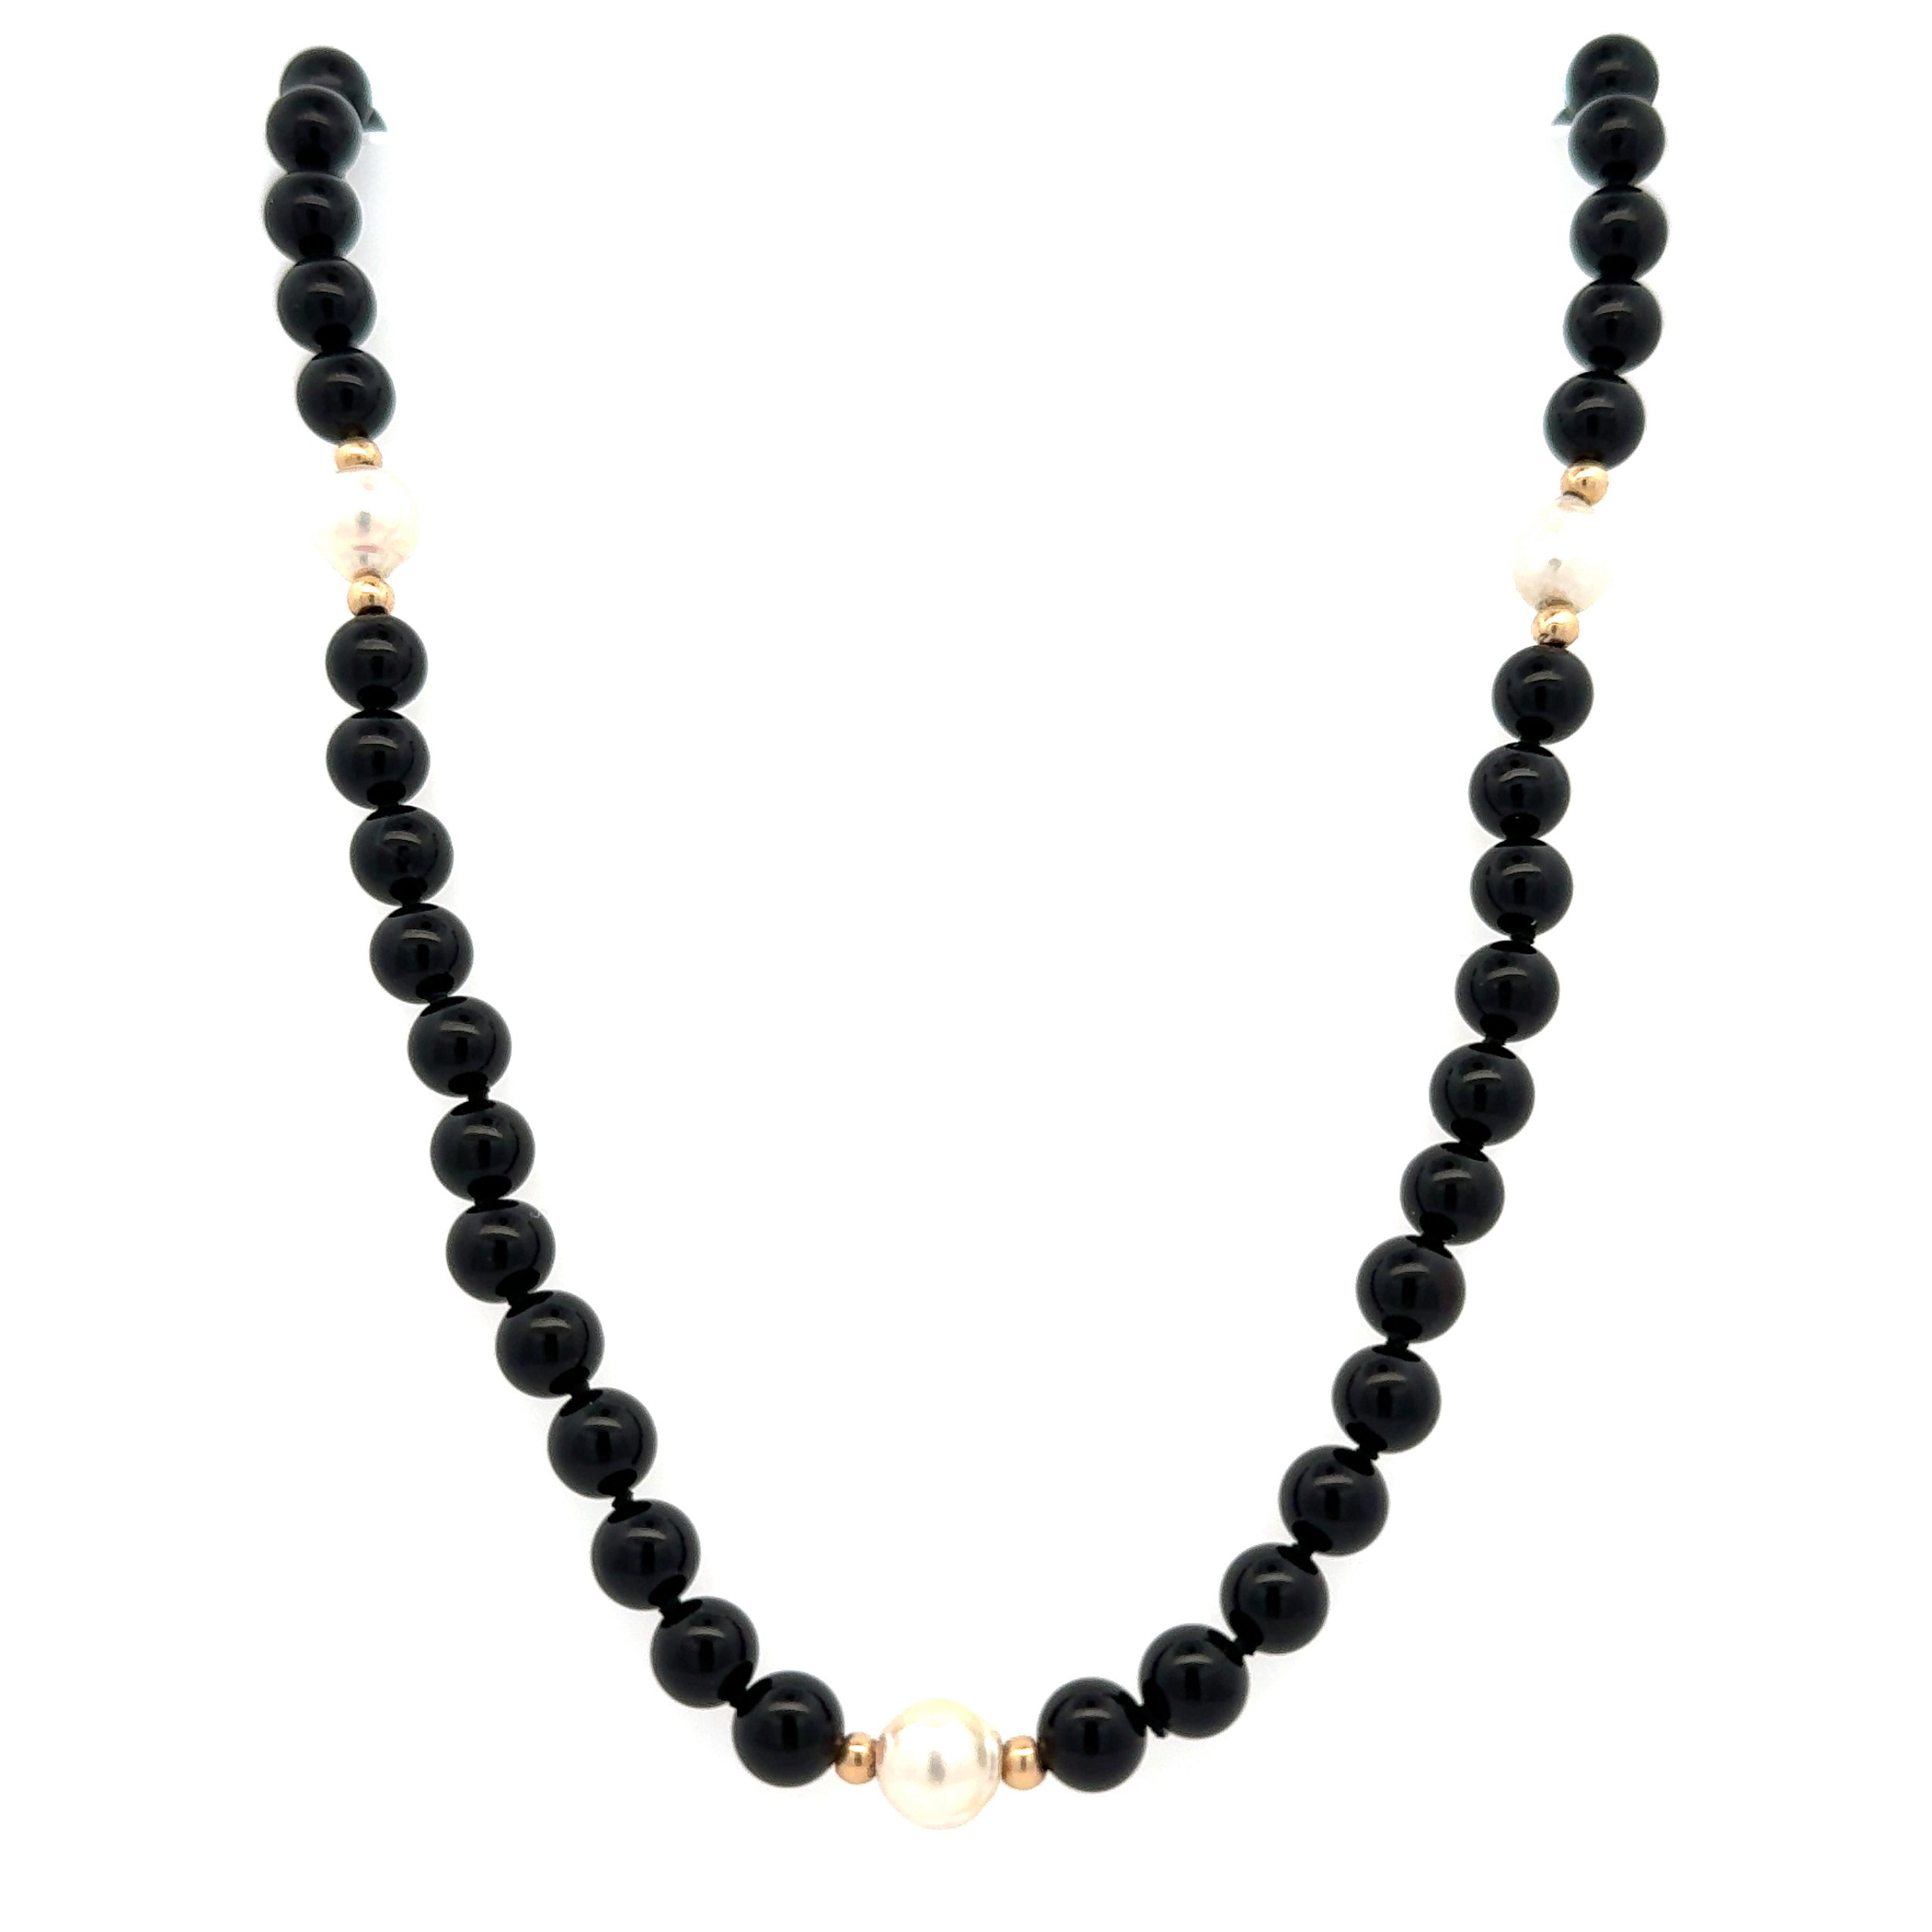 14K YG 6mm Onyx, 7mm Freshwater Pearl & Gold Bead Necklace 22.5g, 19"